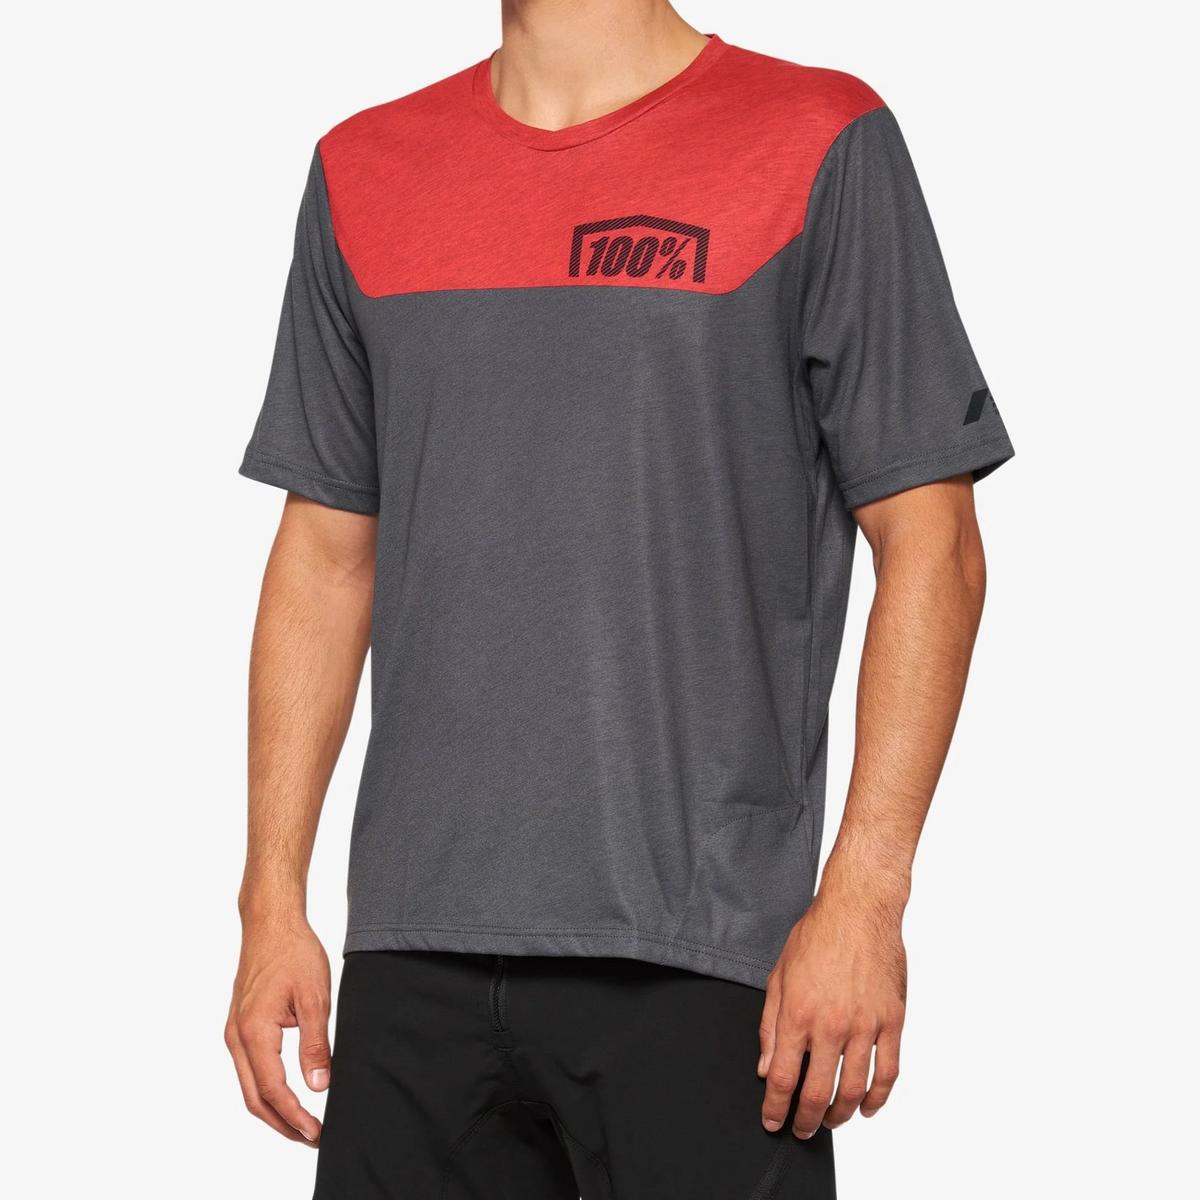 100% Airmatic Short Sleeve Jersey - Charcoal / Red